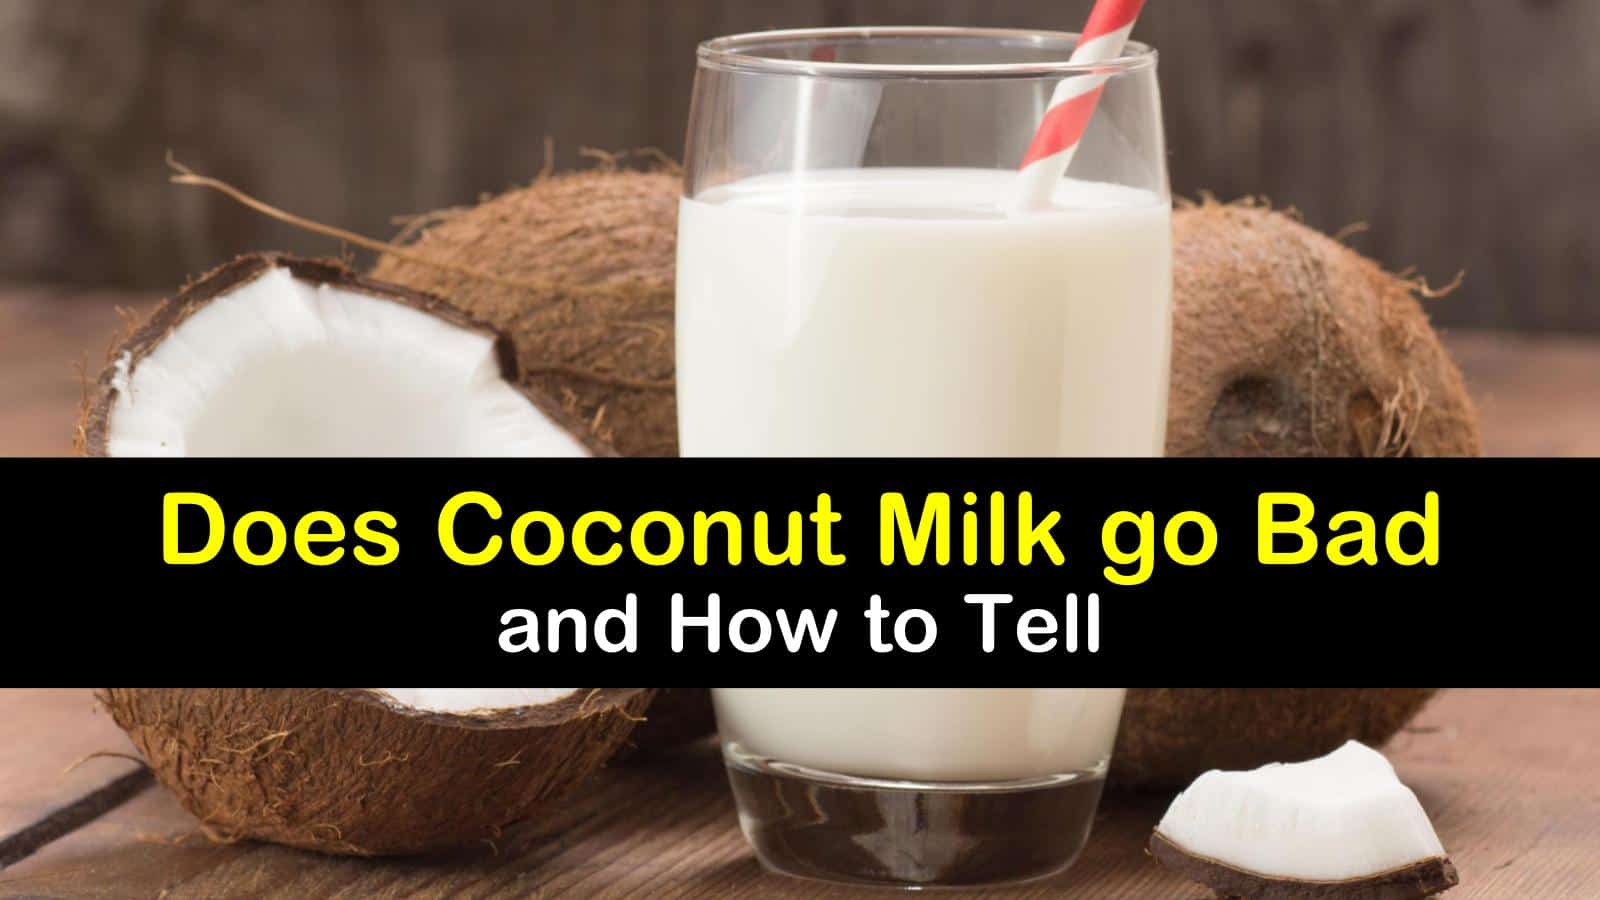 Does Coconut Milk go Bad and How to Tell